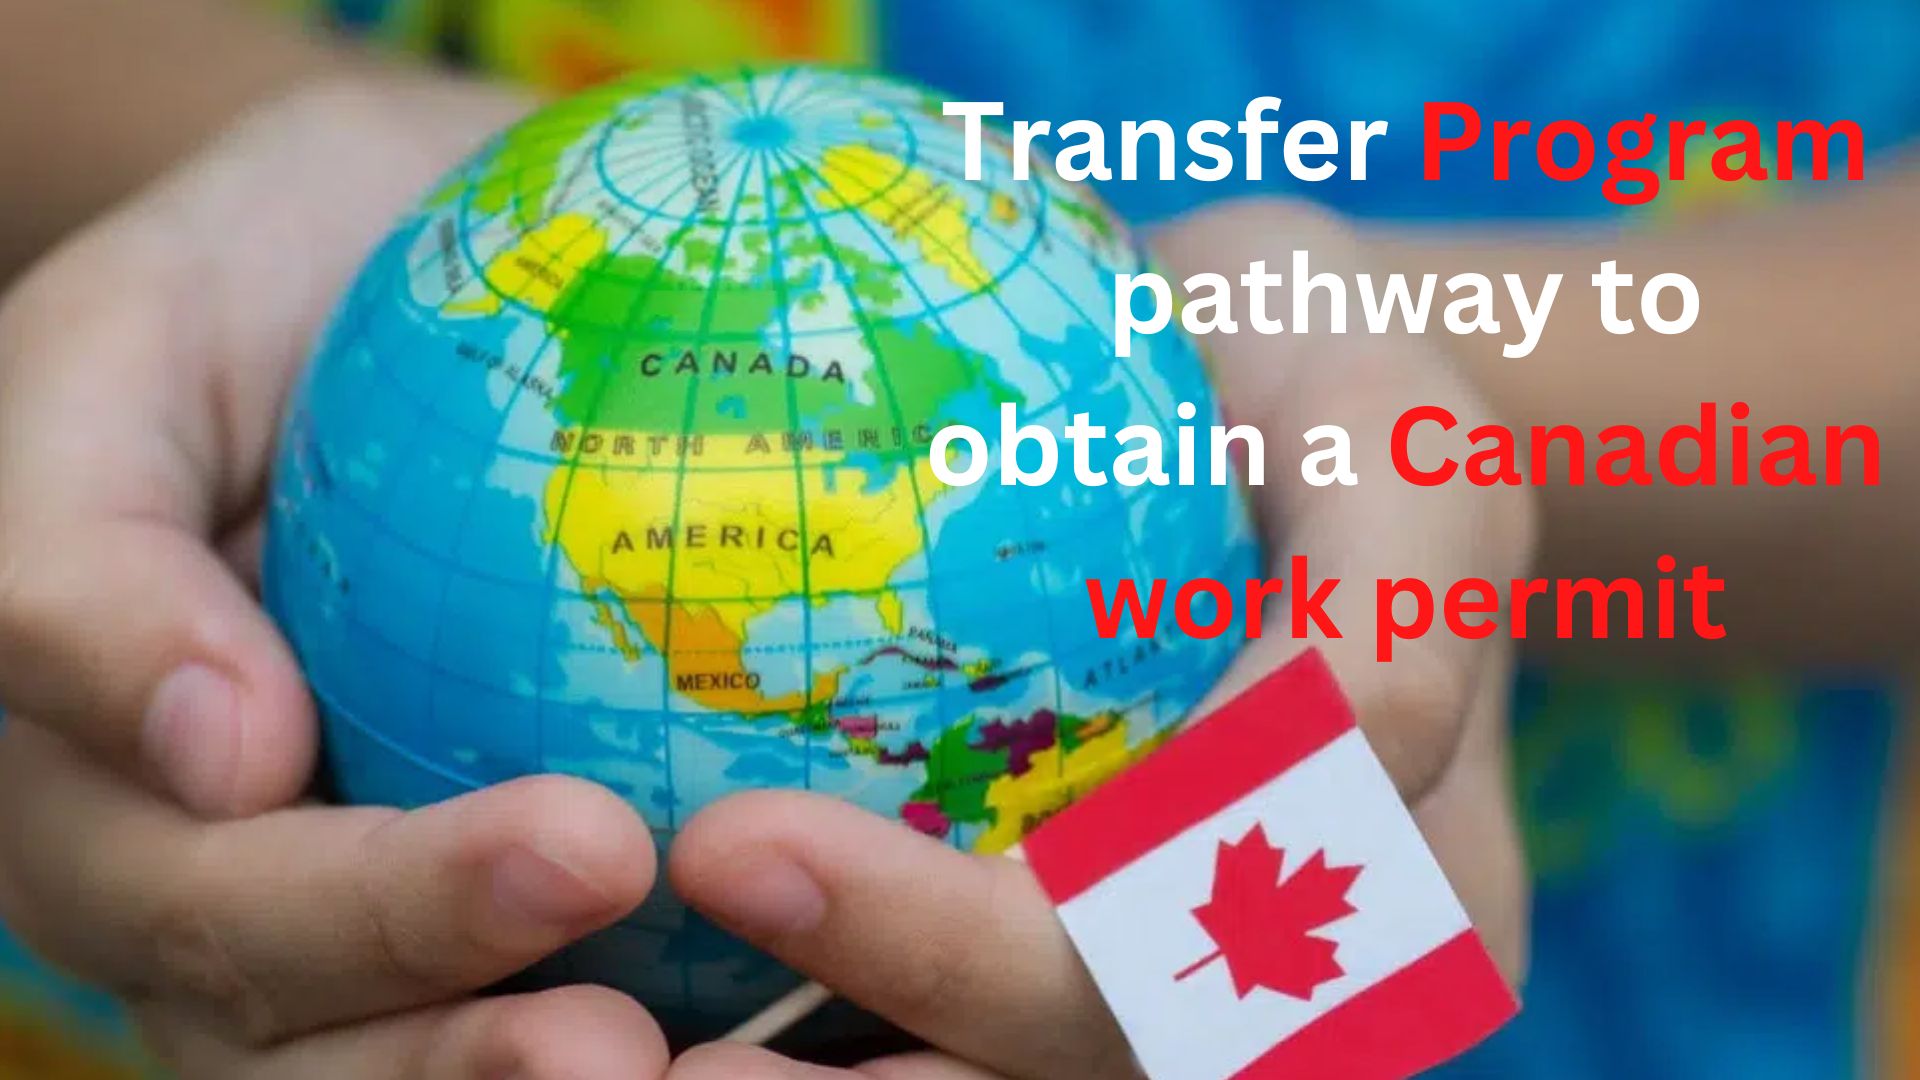 Transfer Program pathway to obtain a Canadian work permit